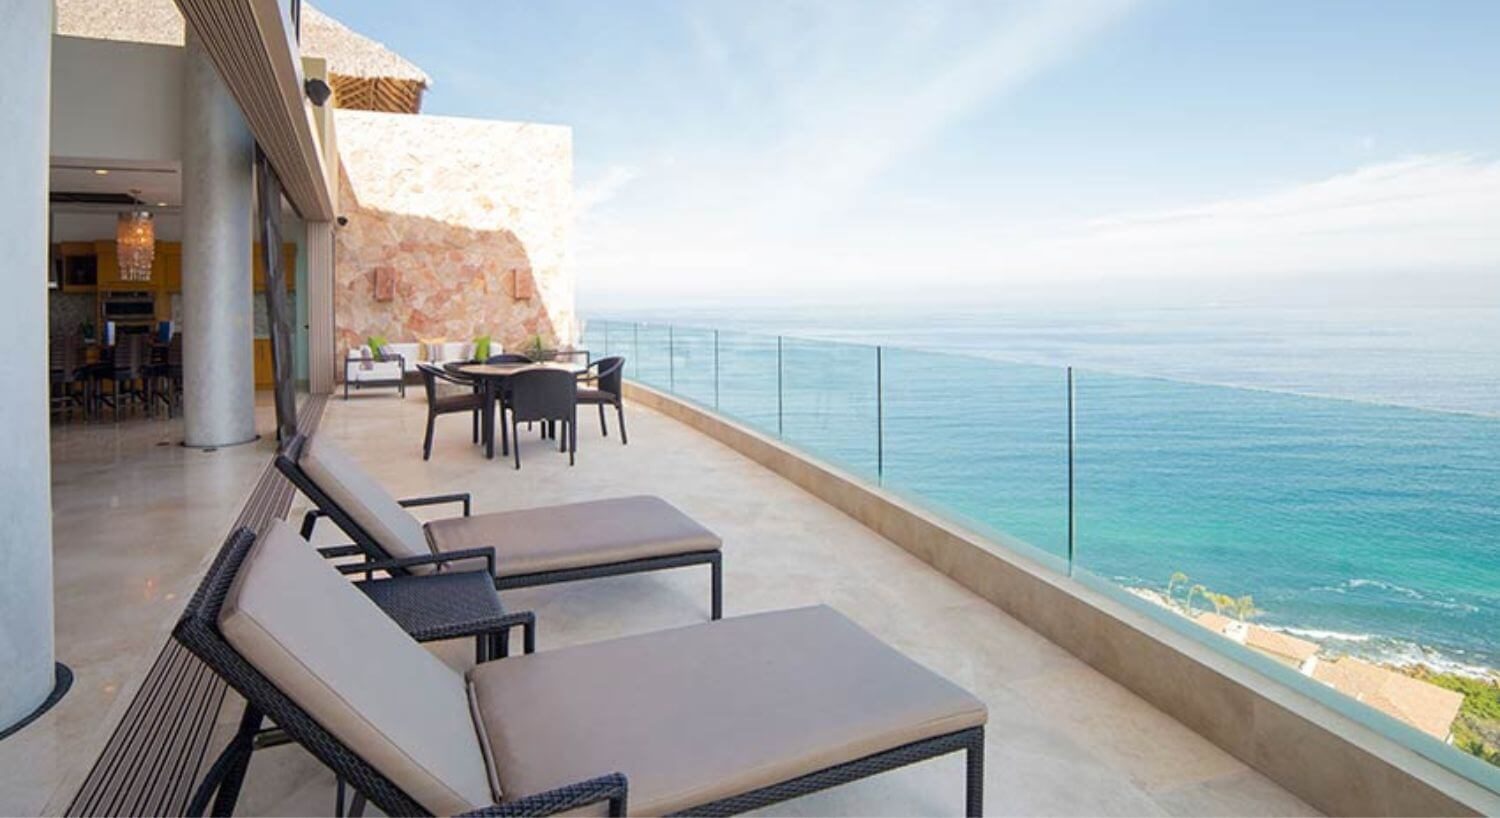 And outdoor balcony with lounge furniture that opens up to the living area of a hotel room, with views of the turquoise ocean waters of Banderas Bay.